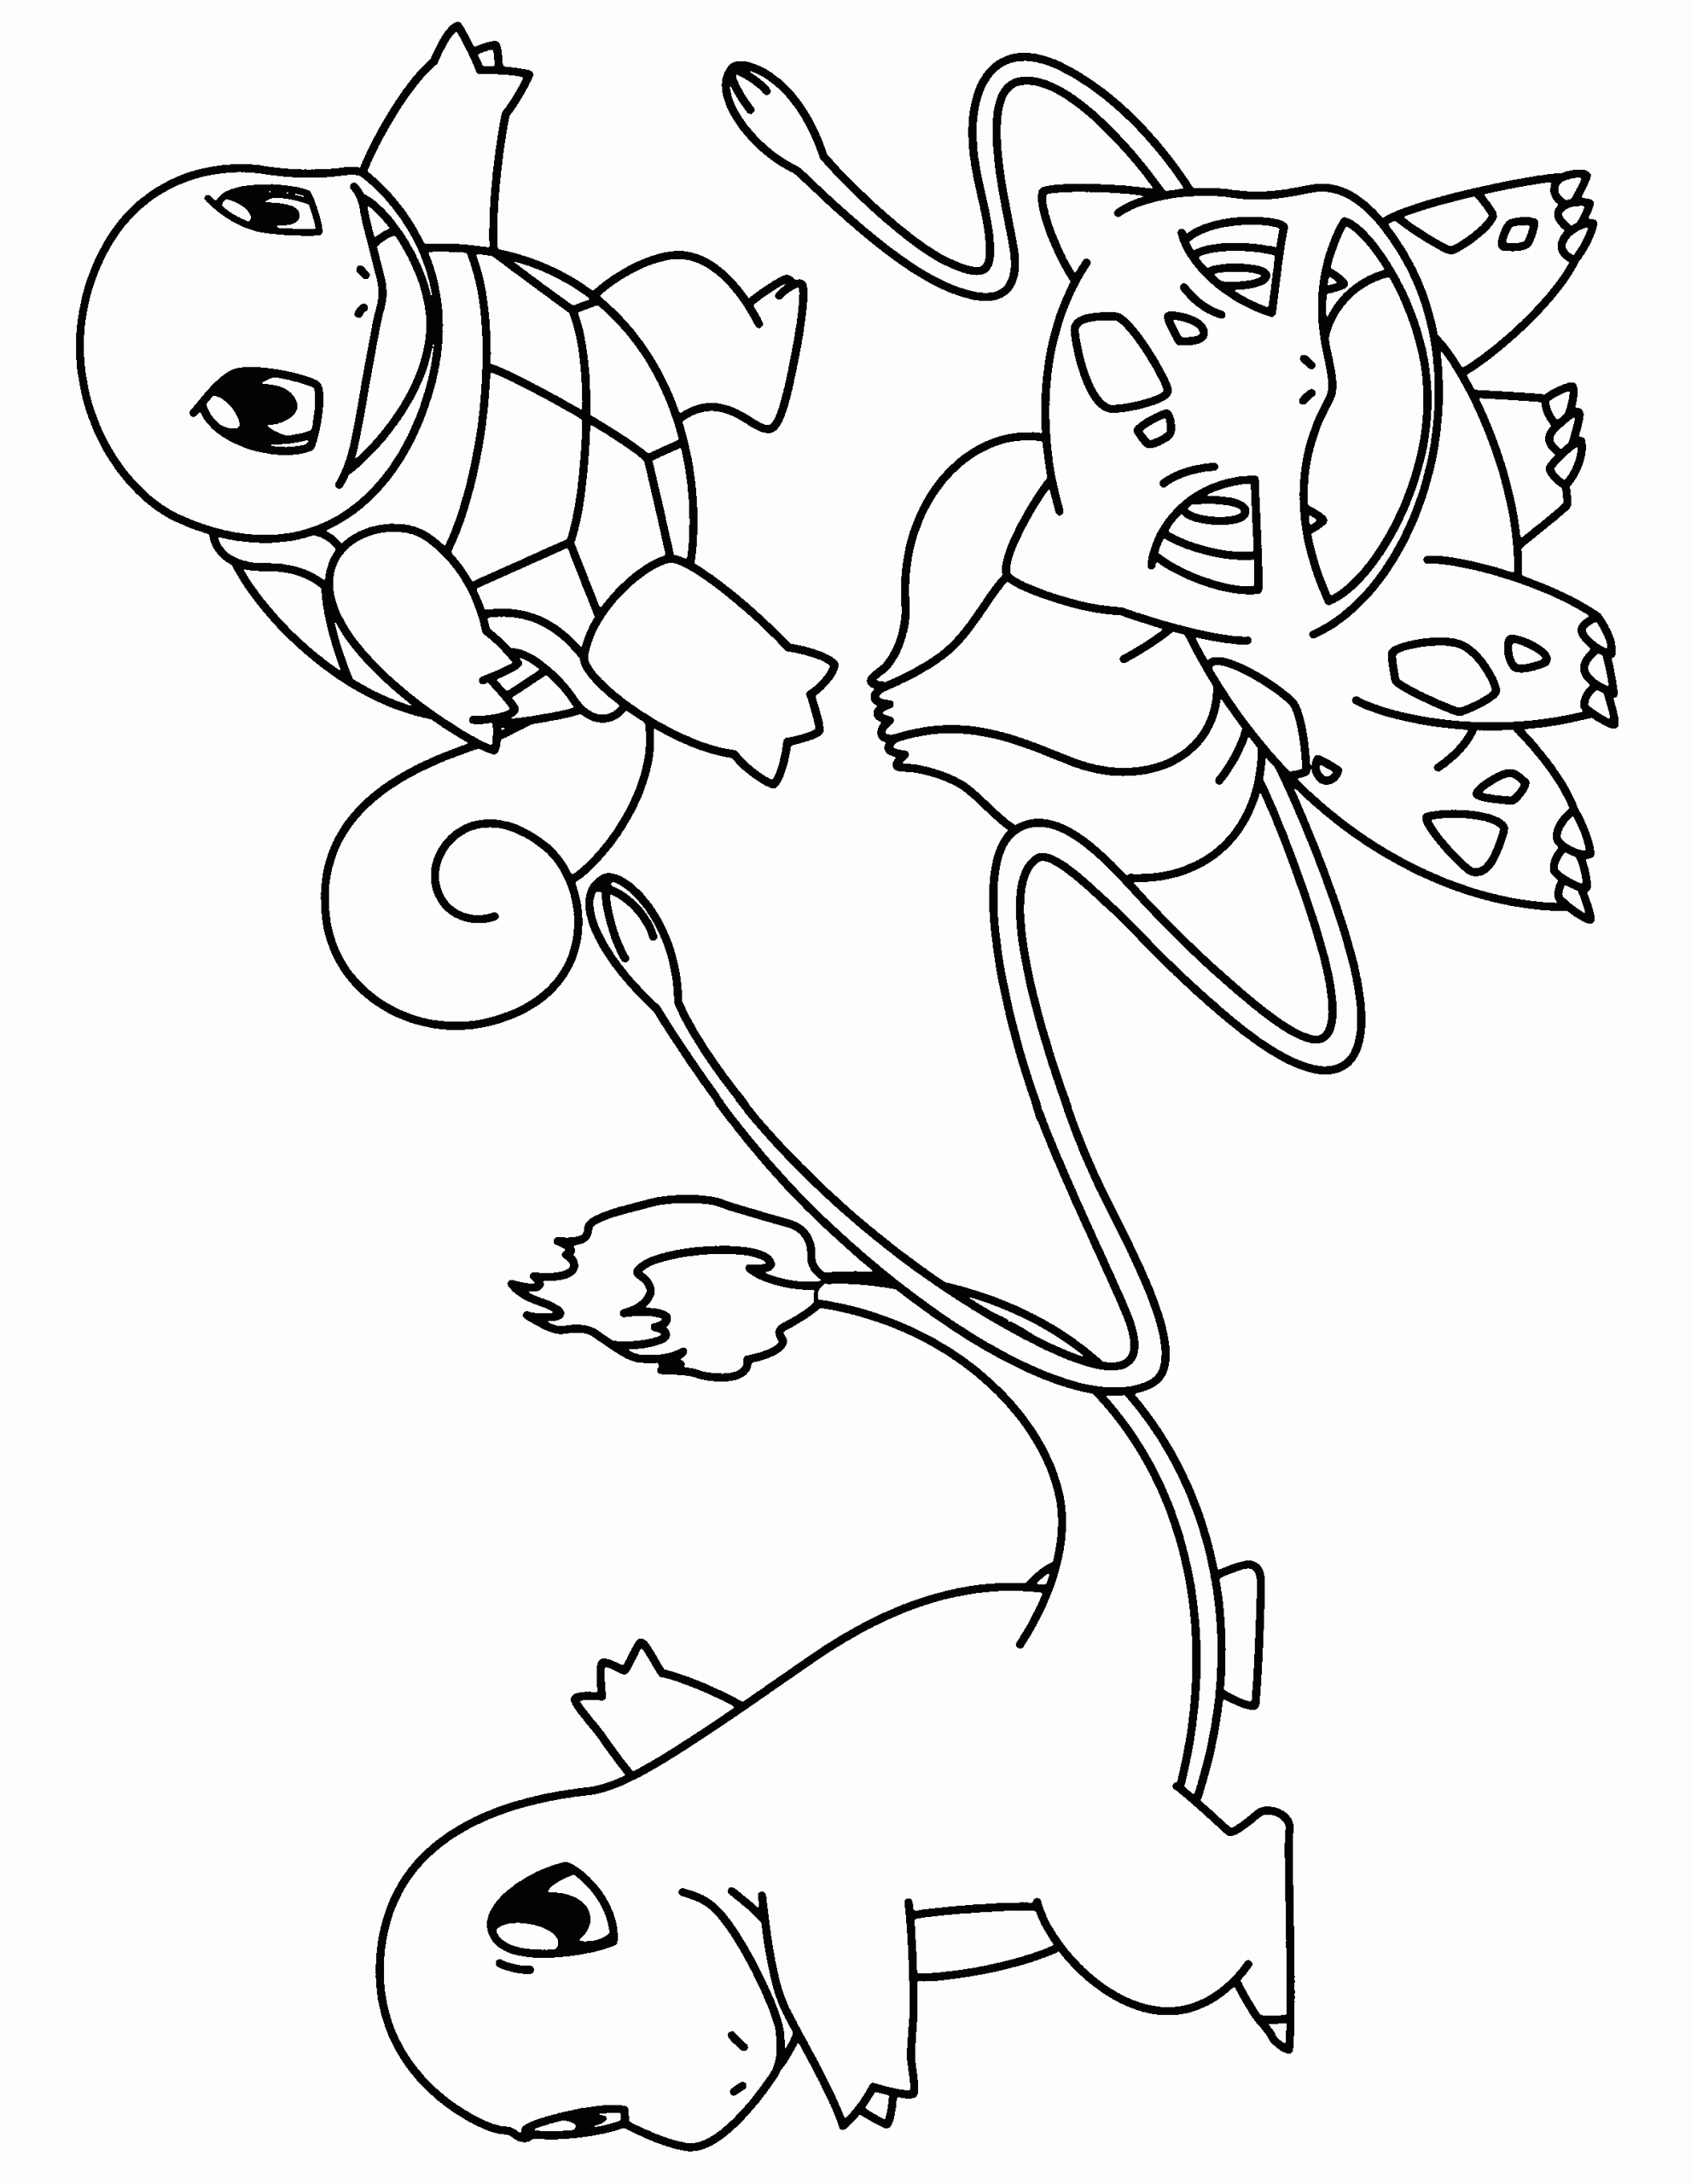 Charmander Black And White Image Coloring Page